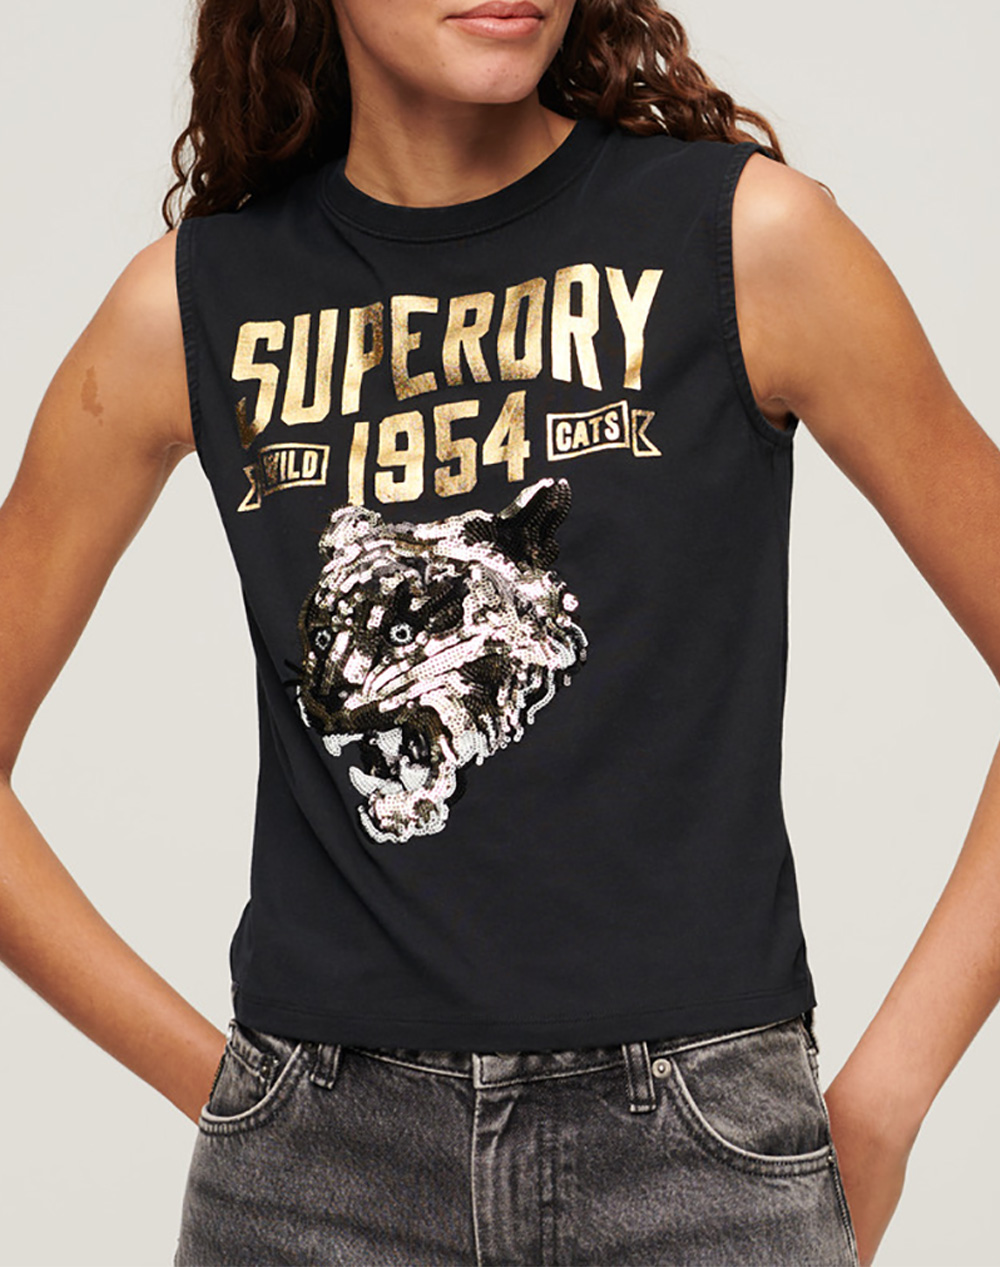 SUPERDRY D3 OVIN EMBELLISH ARCHIVE FITTED TANK ΜΠΛΟΥΖΑ ΓΥΝΑΙΚΕΙΟ W6011899A-12A Black 3810ASUPE3400236_1183